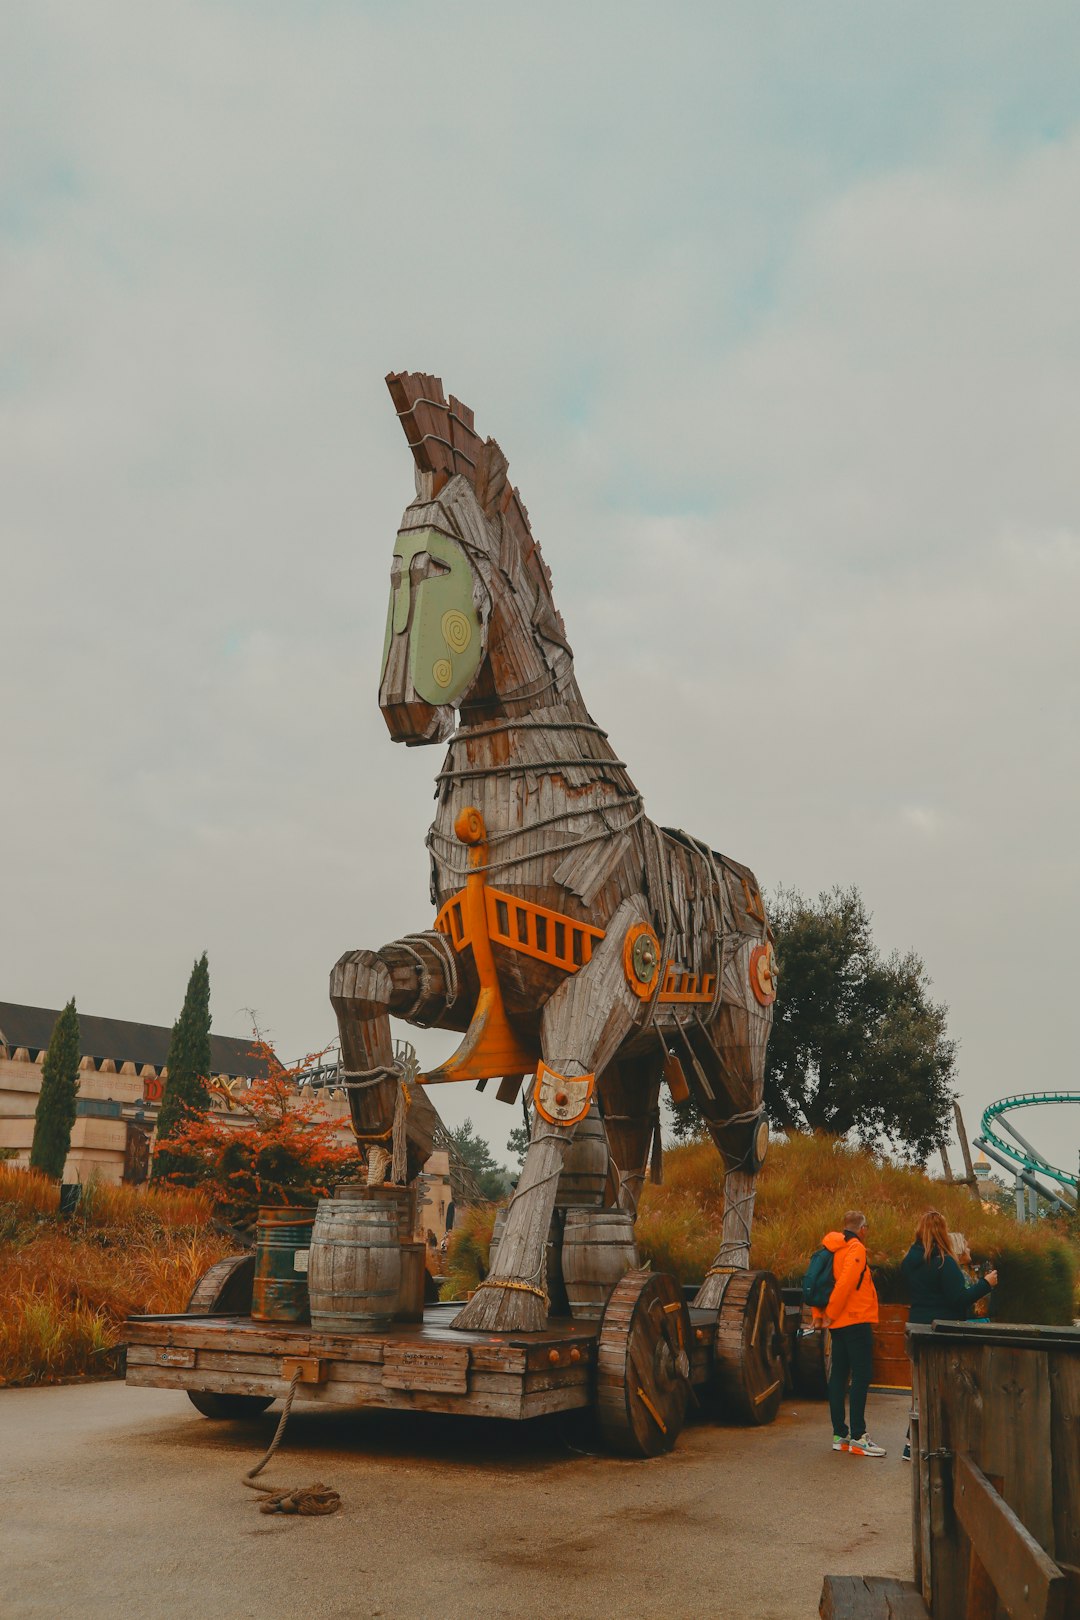 a large wooden horse statue sitting on top of a dirt field